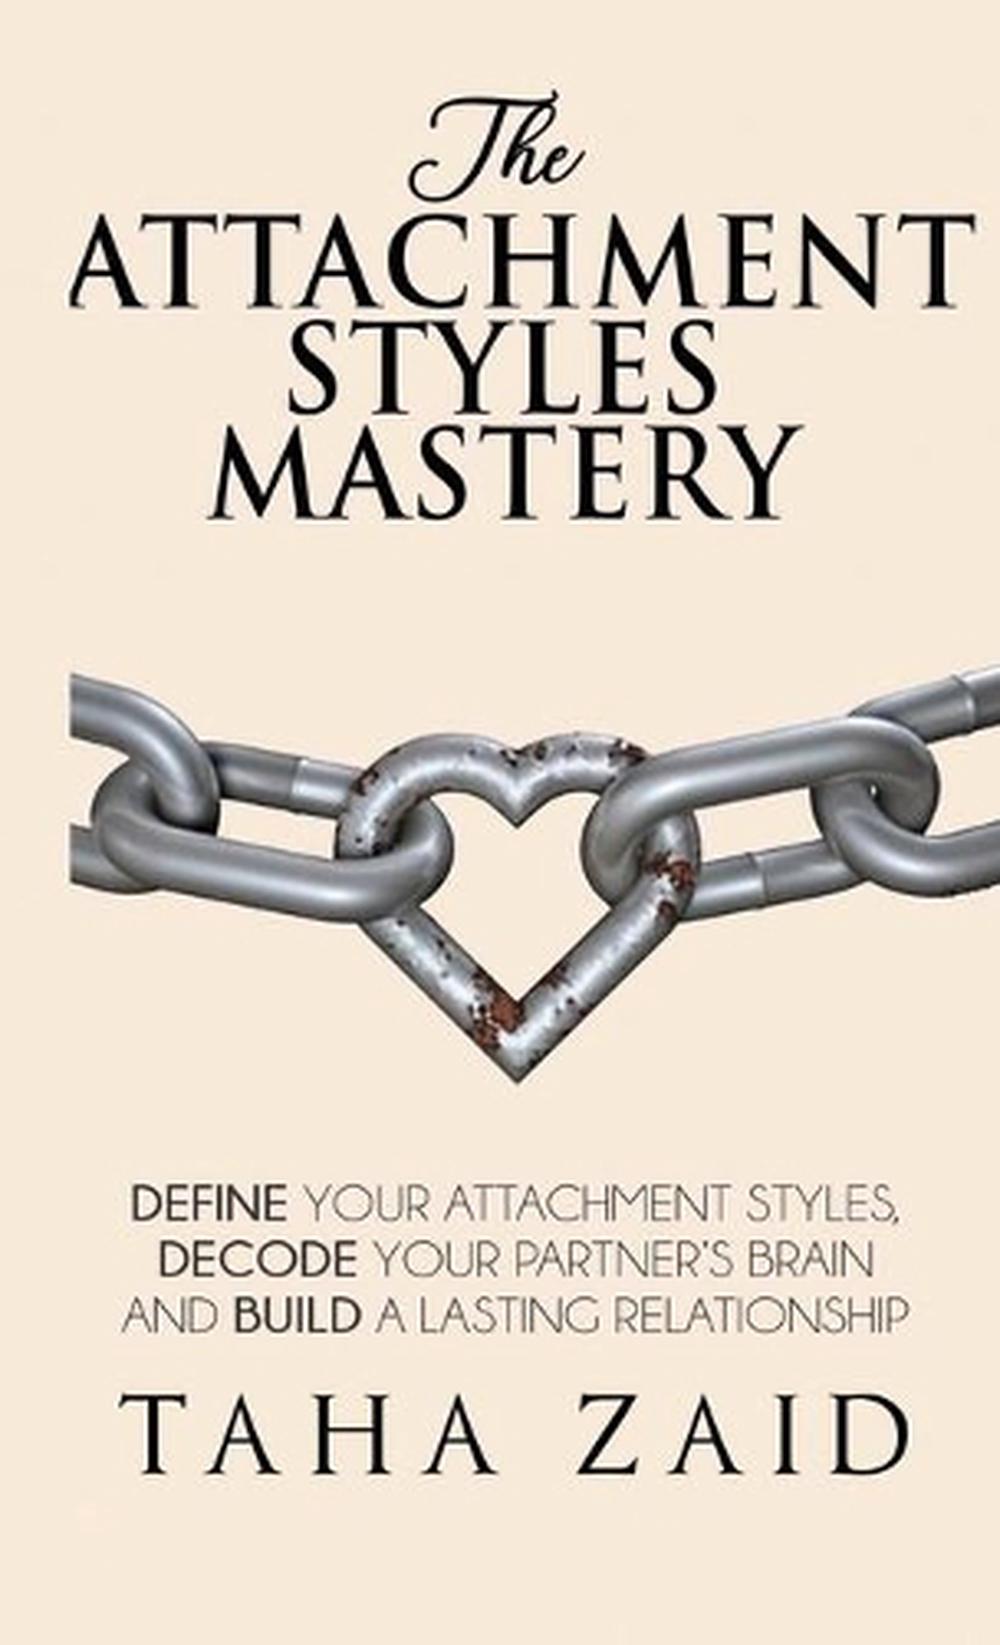 The Attachment Styles Mastery by Taha Zaid (English) Hardcover Book